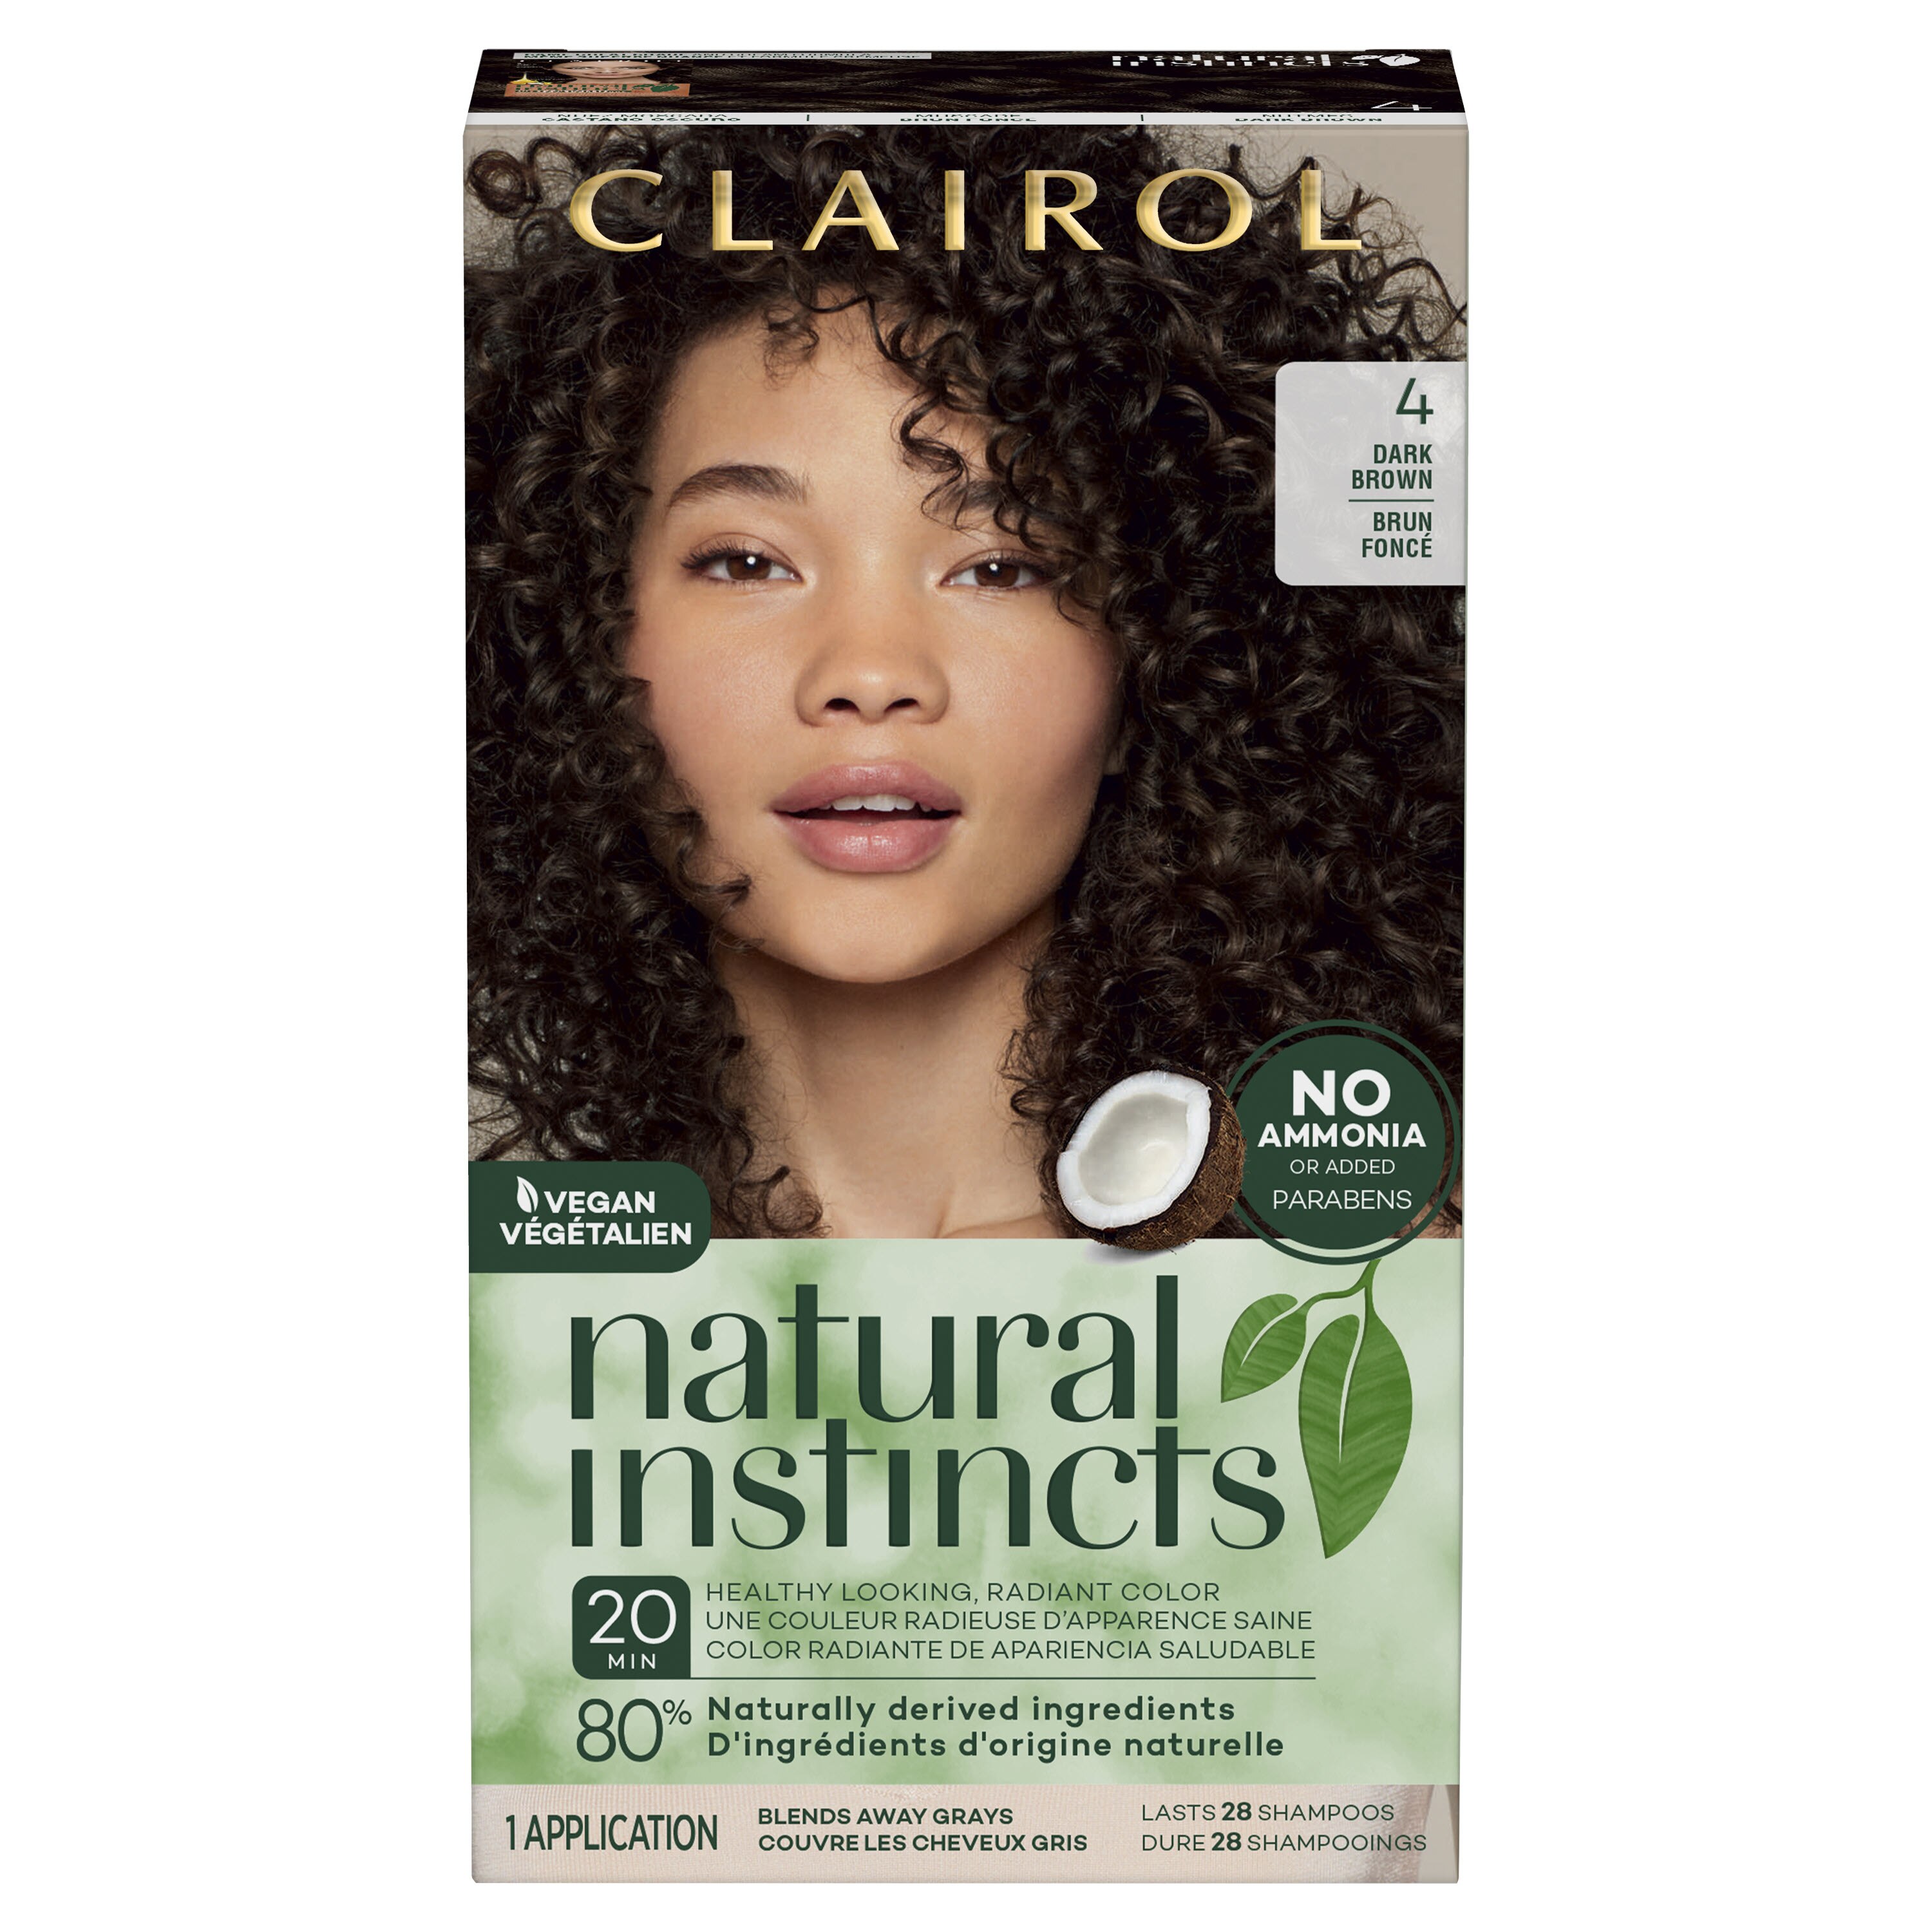 Clairol Natural Instincts Semi-Permanent Hair Color 1 Kit | Pick Up In